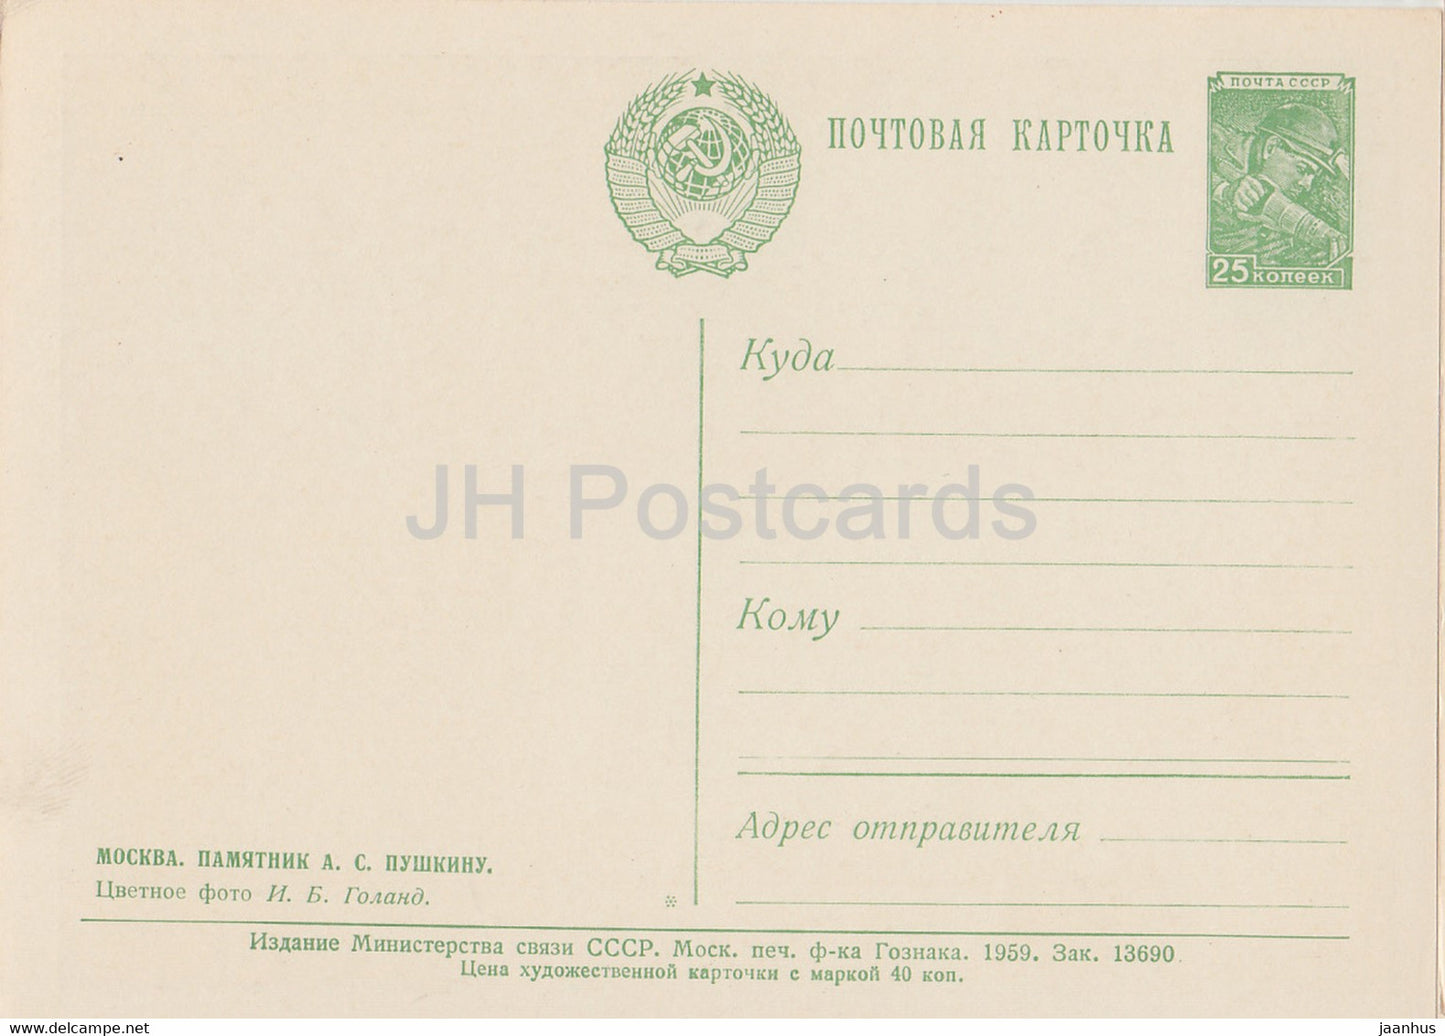 Moscow - monument to Russian writer Pushkin - postal stationery - 1959 - Russia USSR - unused